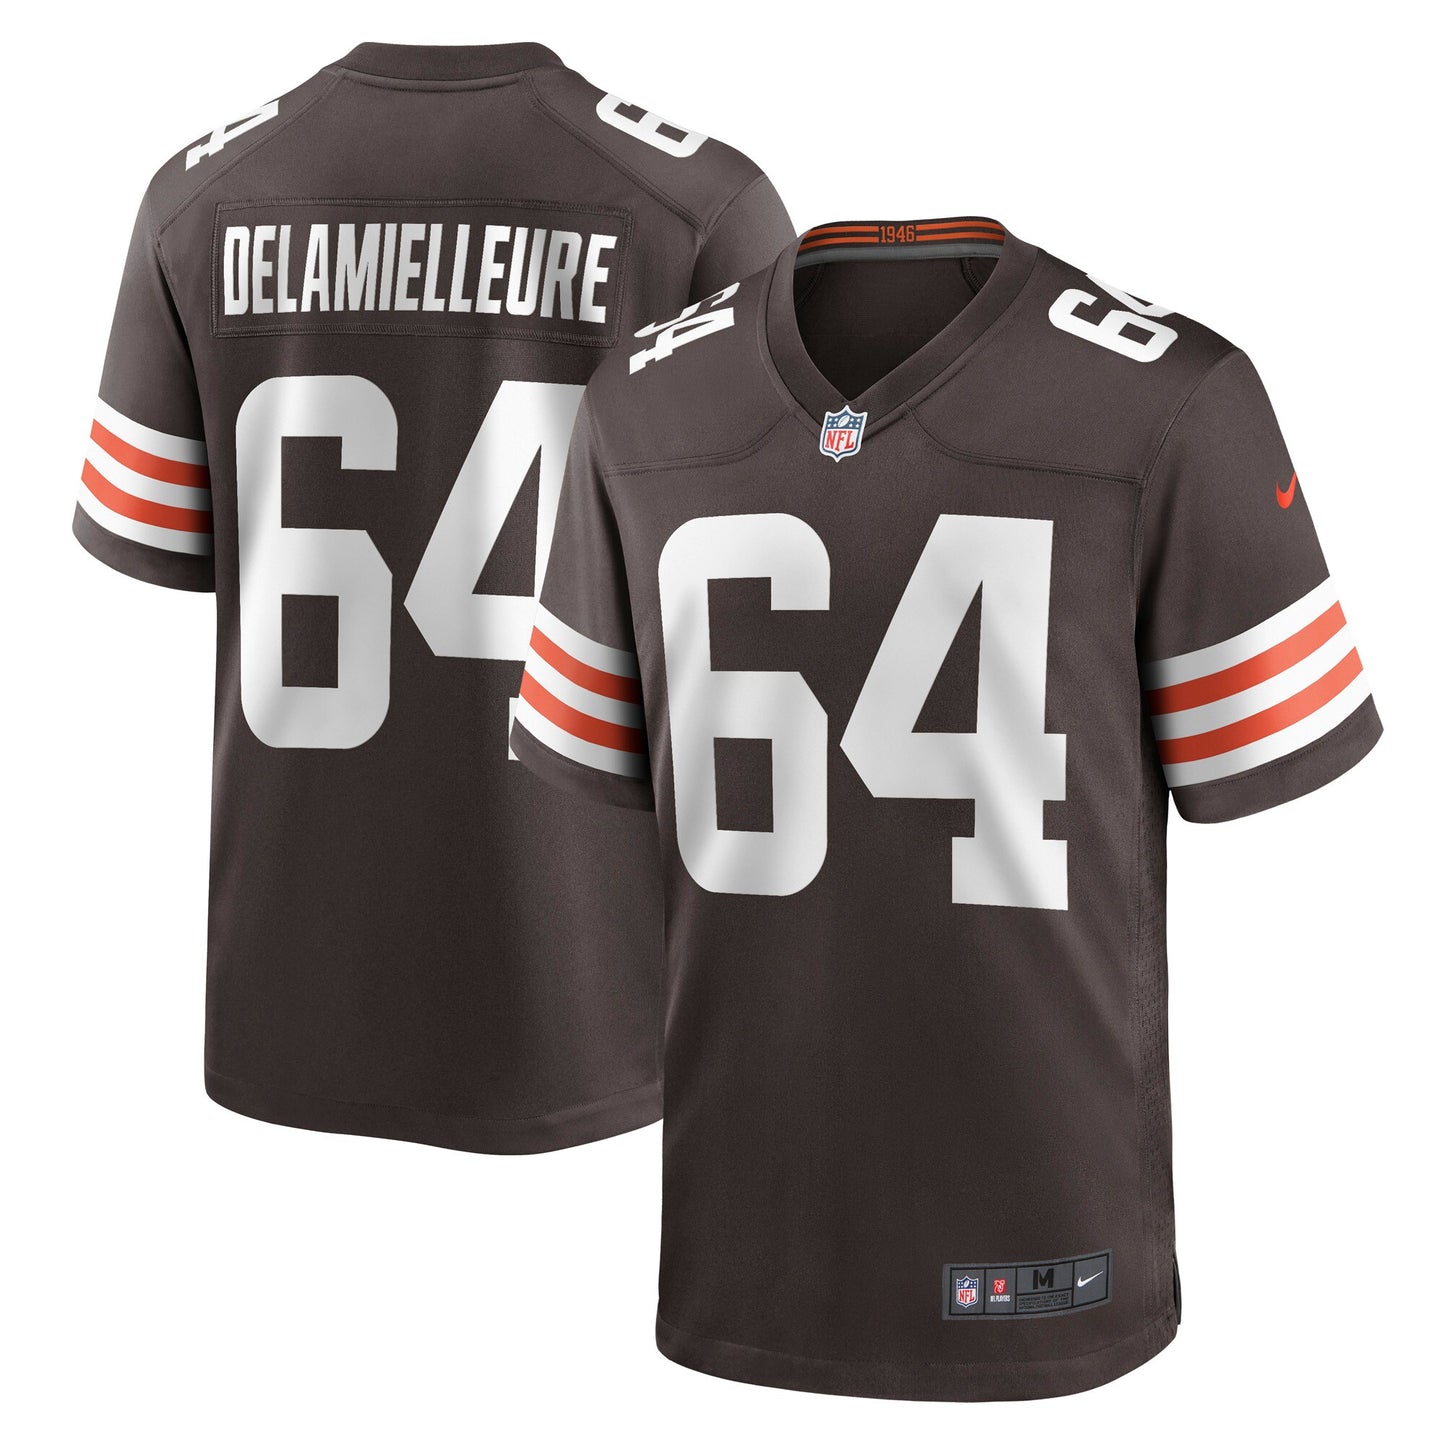 Joe DeLamielleure Cleveland Browns Nike Game Retired Player Jersey - Brown